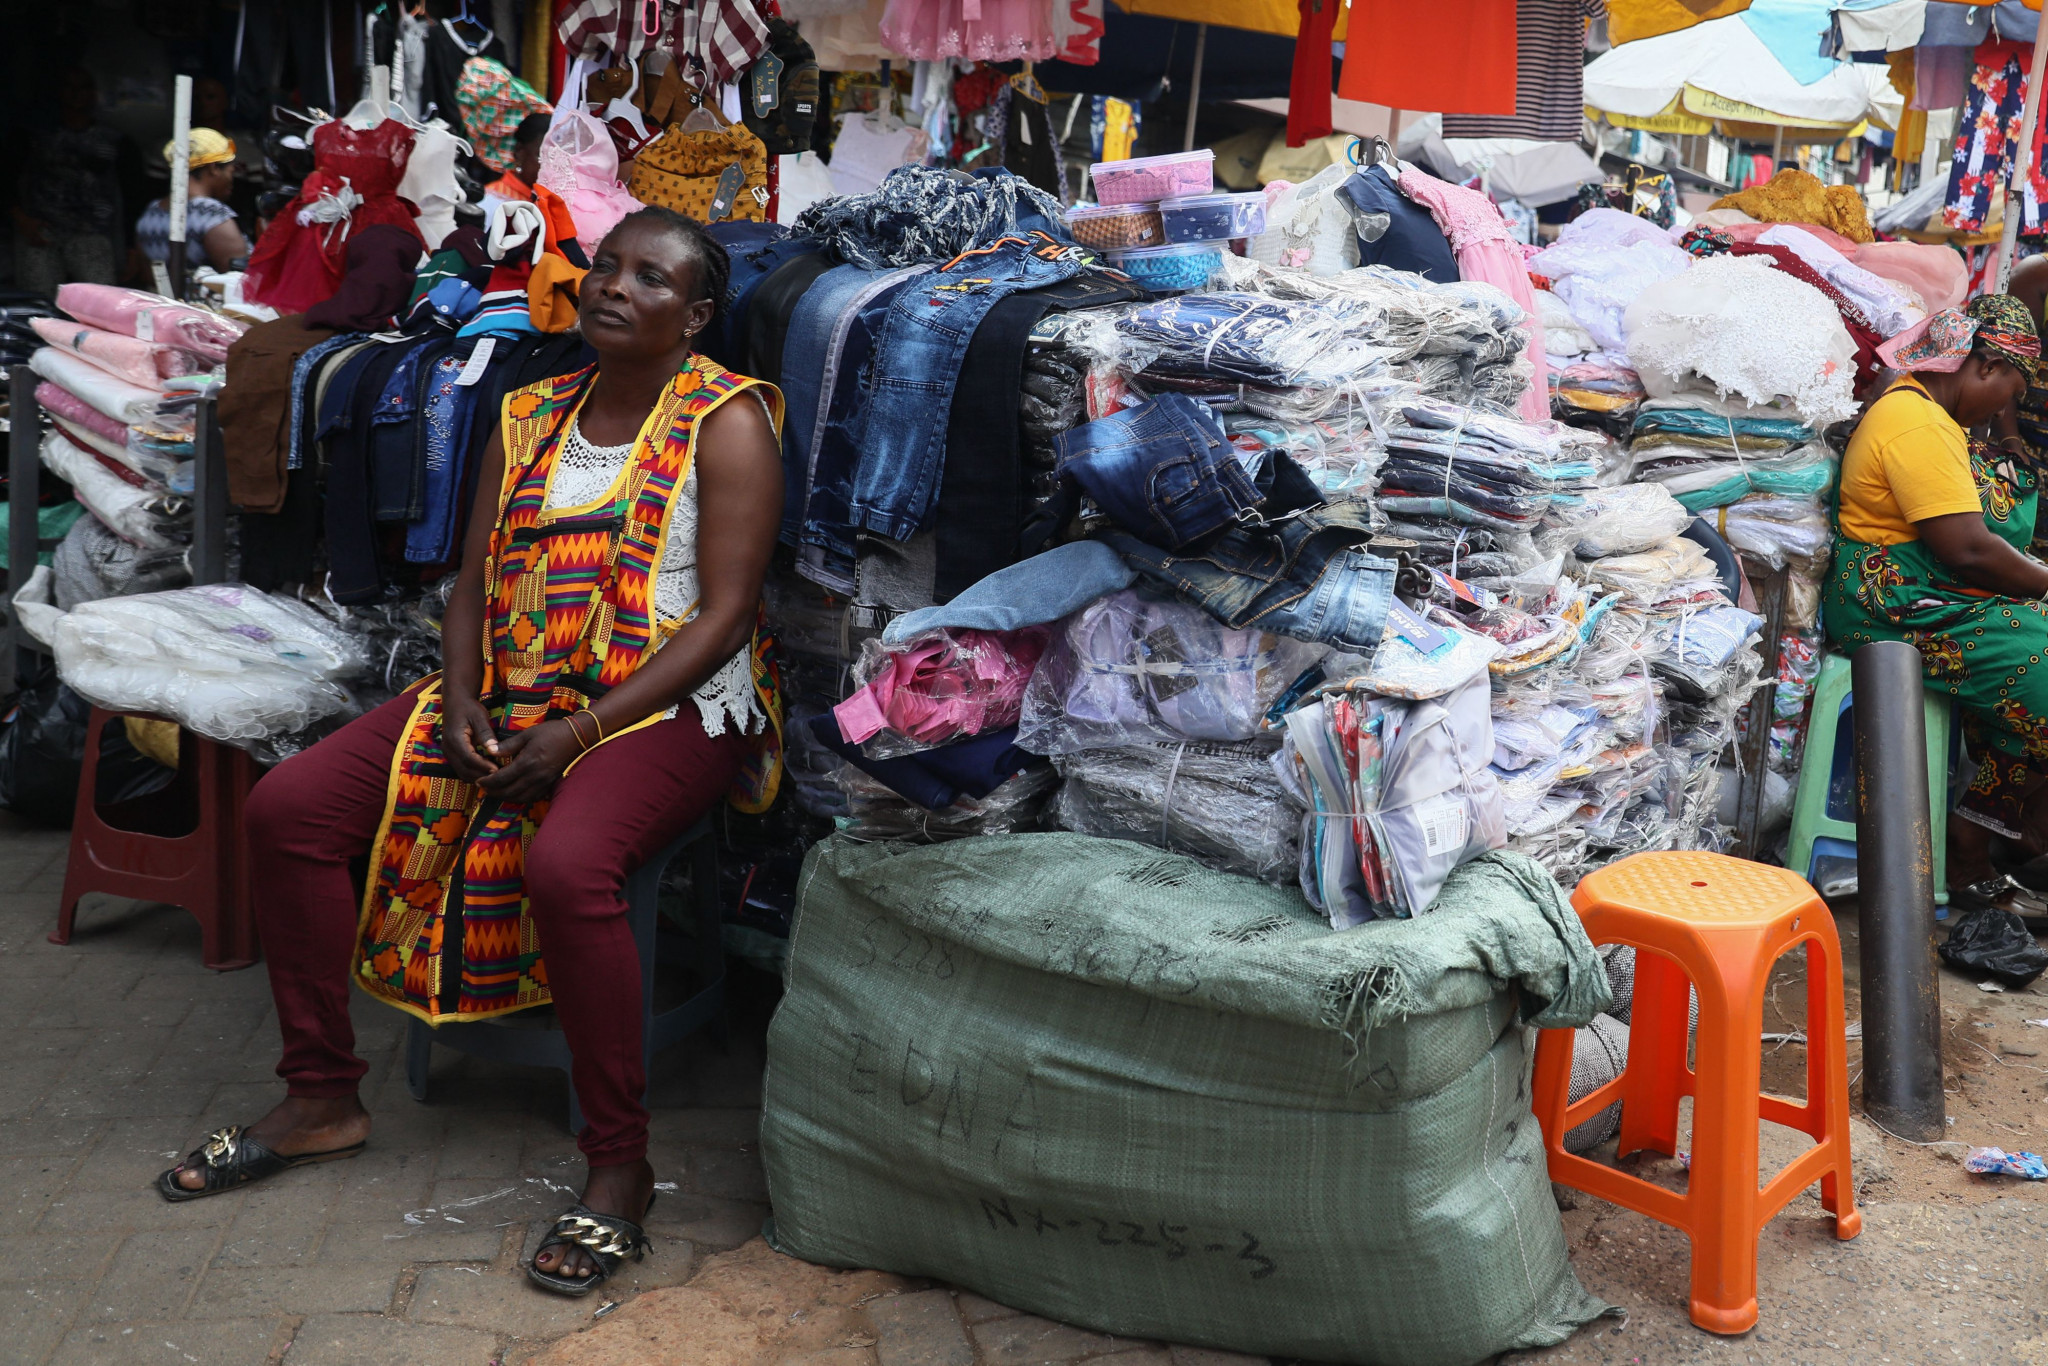 Inflation is Ghana has been running at more than 50 per cent as the country has faced one of its worst economic crisis ©Getty Images